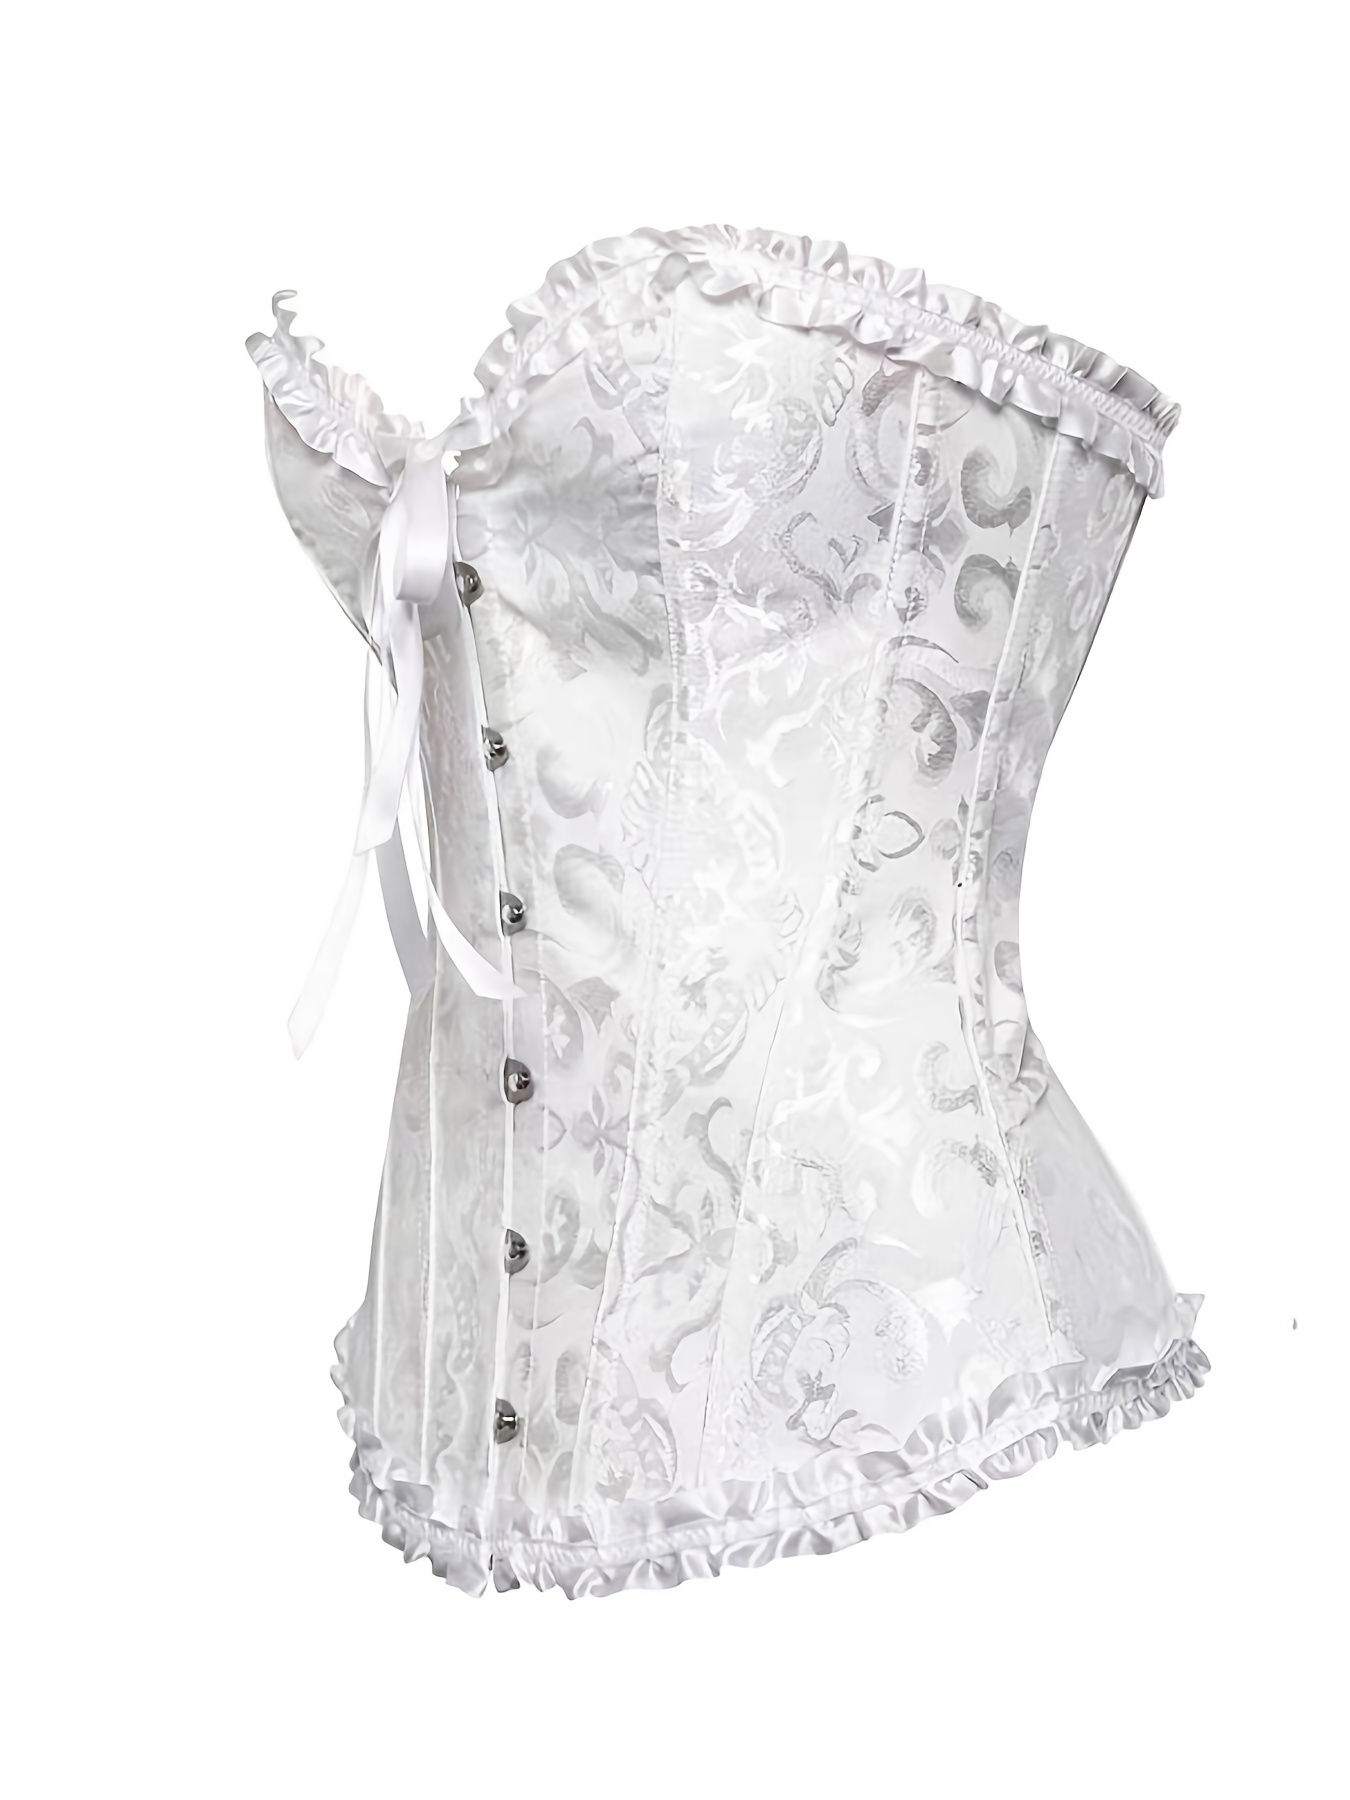 Taqqpue Womens Vintage Floral Print White Corset Sexy Lace